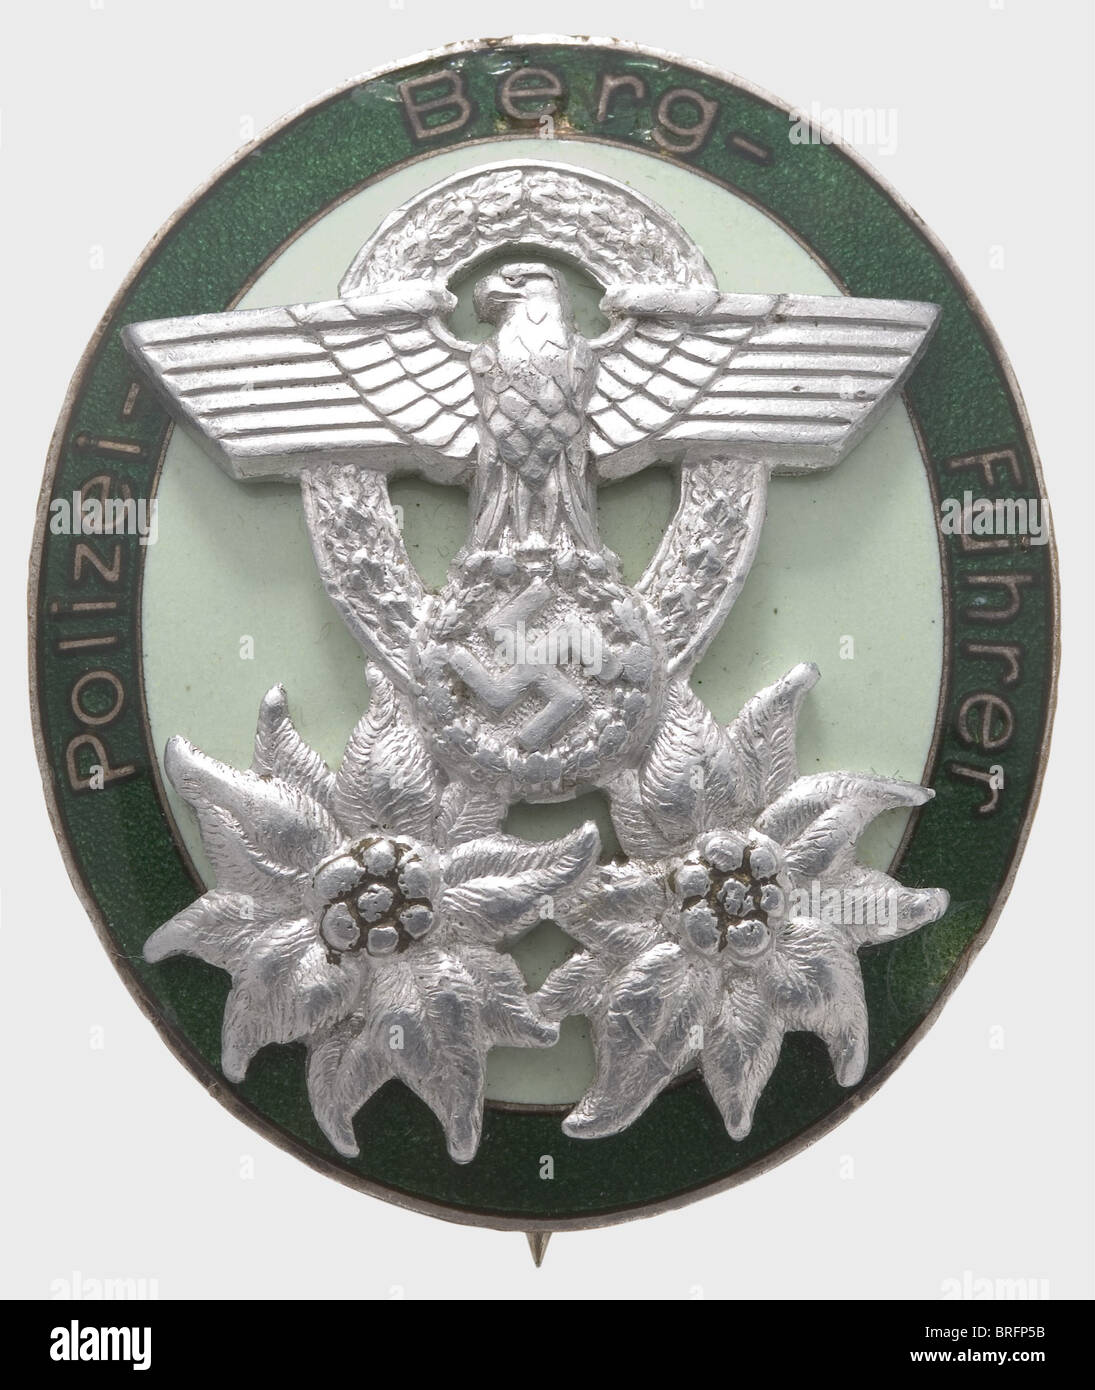 A Police Mountain Leader Badge, non-ferrous metal, silvered with light green enamel, the inscription ring with dark green transparent enamel (slight spidering), three-rivet aluminium appliqués, vertical wire attachment pin (OEK 3663). historic, historical, 1930s, 1930s, 20th century, awards, award, German Reich, Third Reich, Nazi era, National Socialism, object, objects, stills, medal, decoration, medals, decorations, clipping, cut out, cut-out, cut-outs, honor, honour, National Socialist, Nazi, Nazi period, symbol, symbols, emblem, emblems, insignia, Additional-Rights-Clearences-Not Available Stock Photo